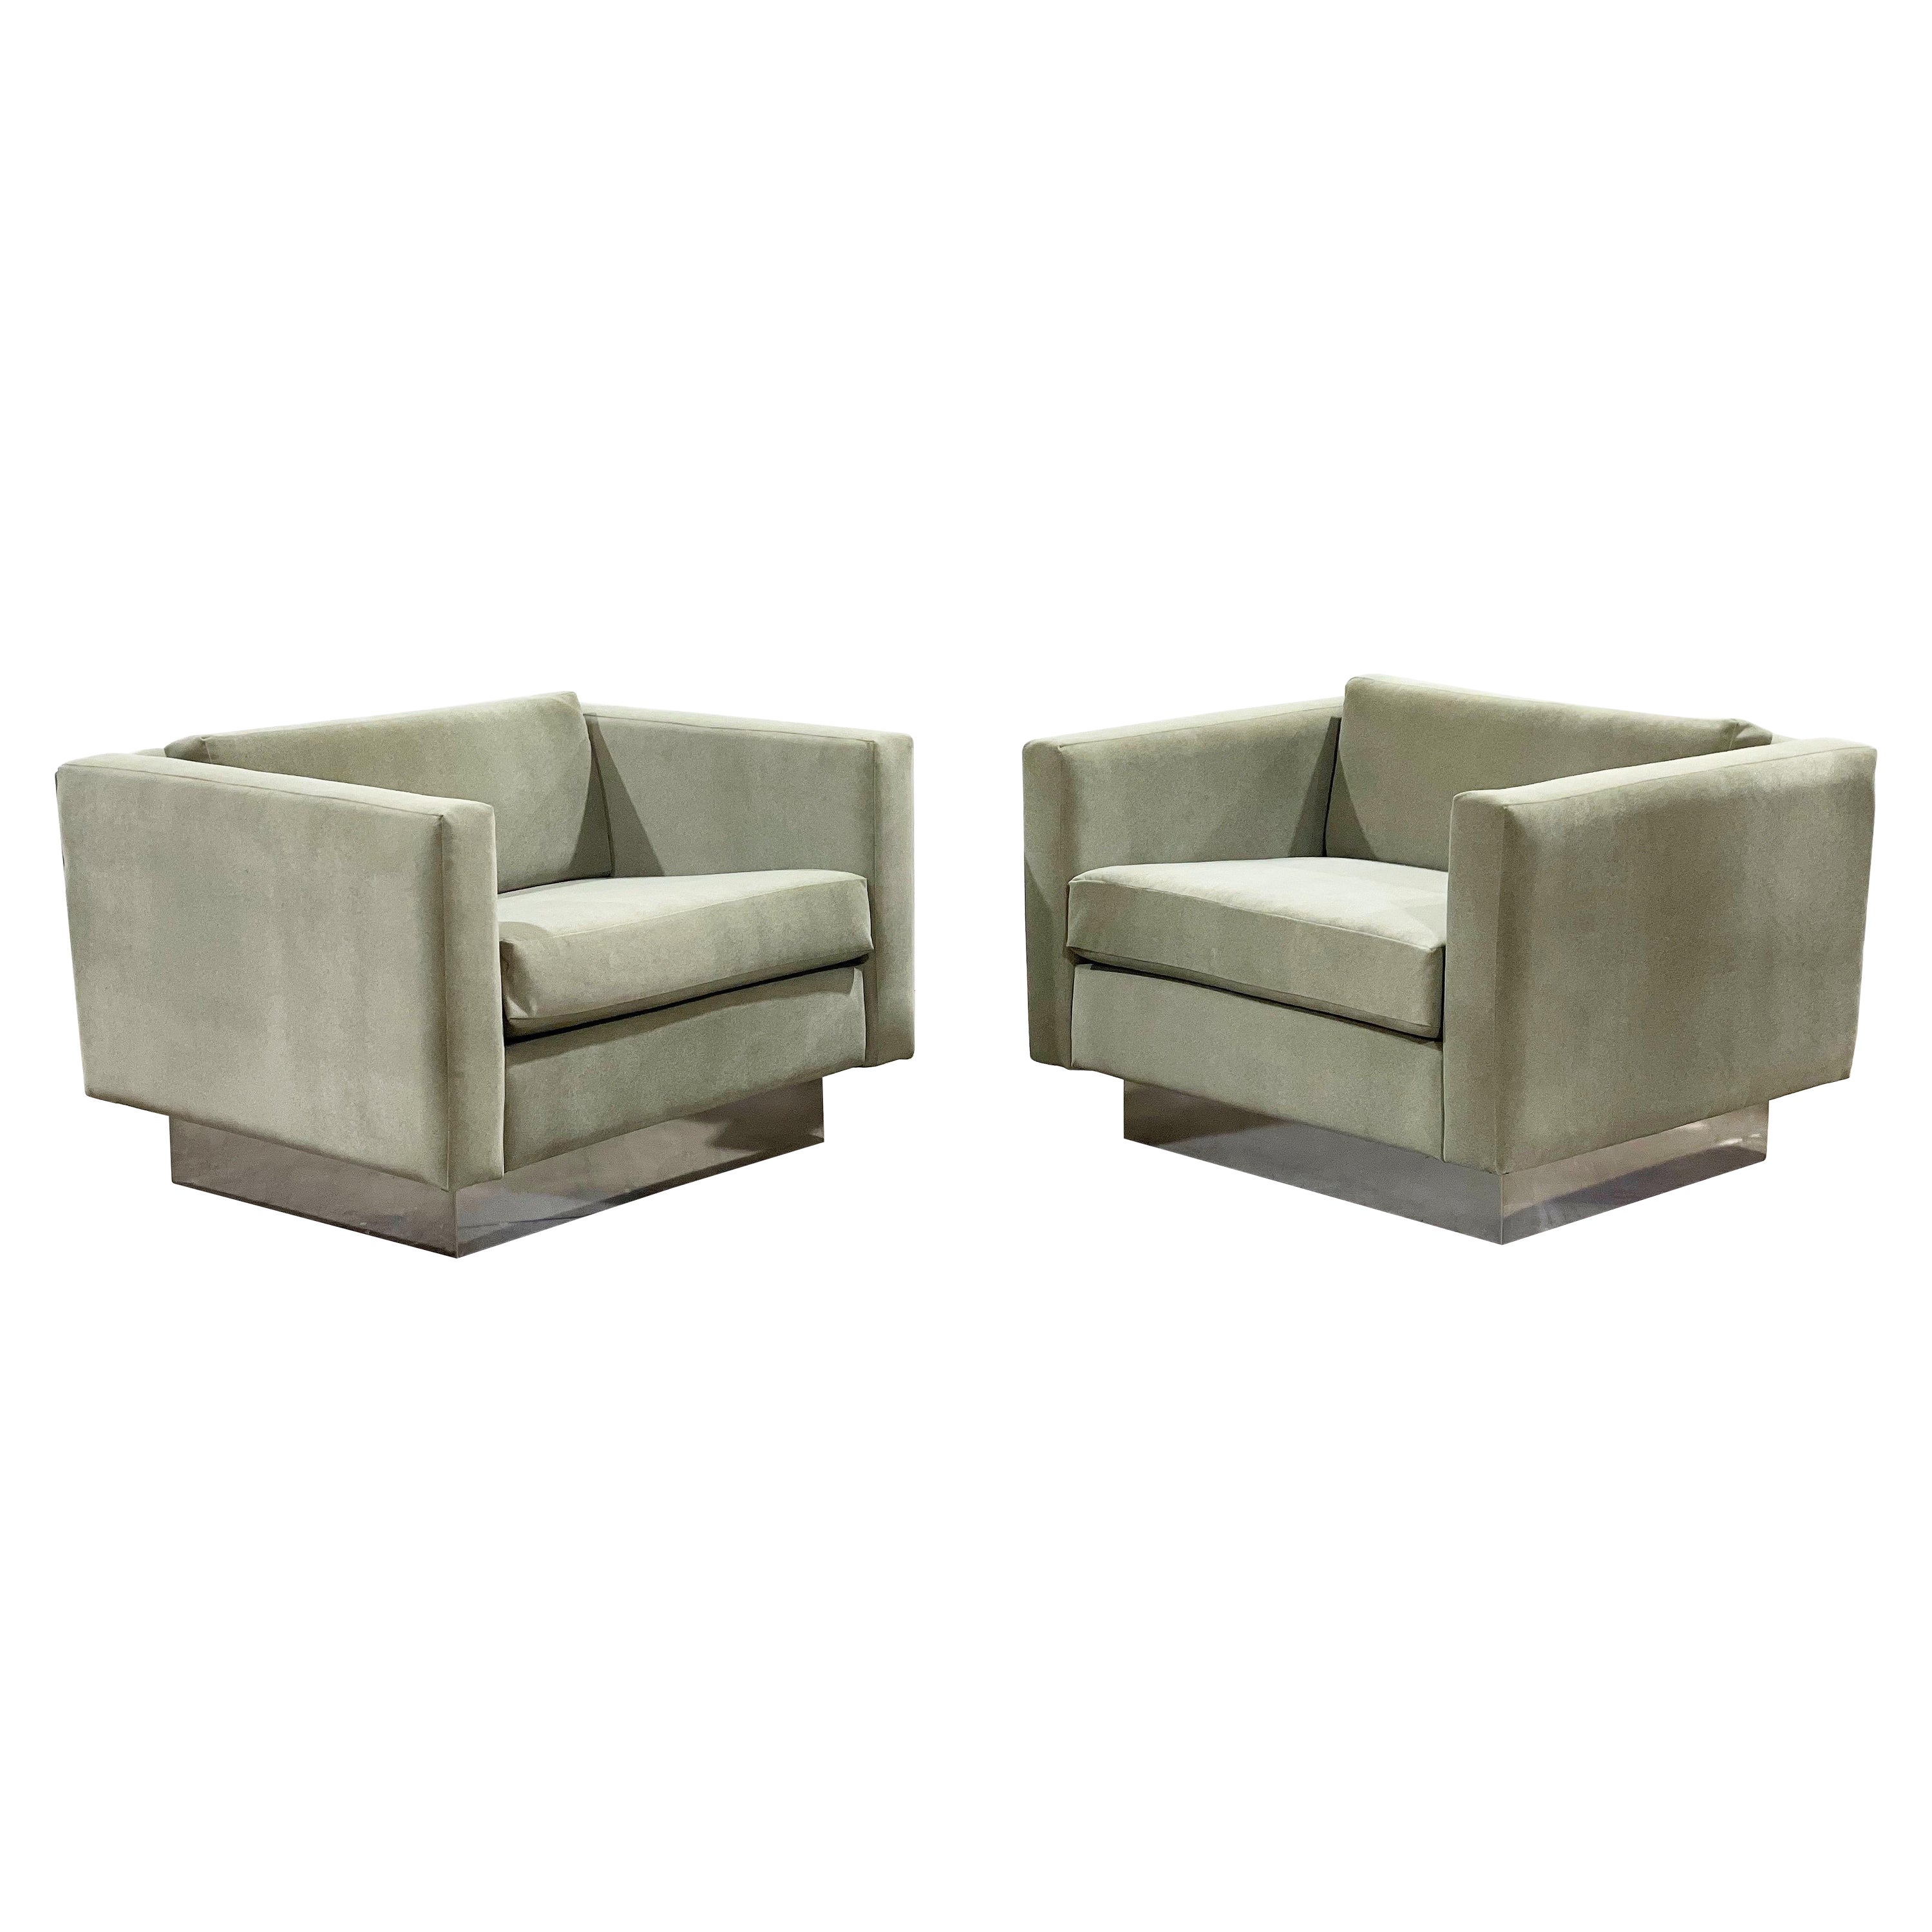 Pair Adrian Pearsall for Craft Associates Midcentury Cube Lounge Chairs